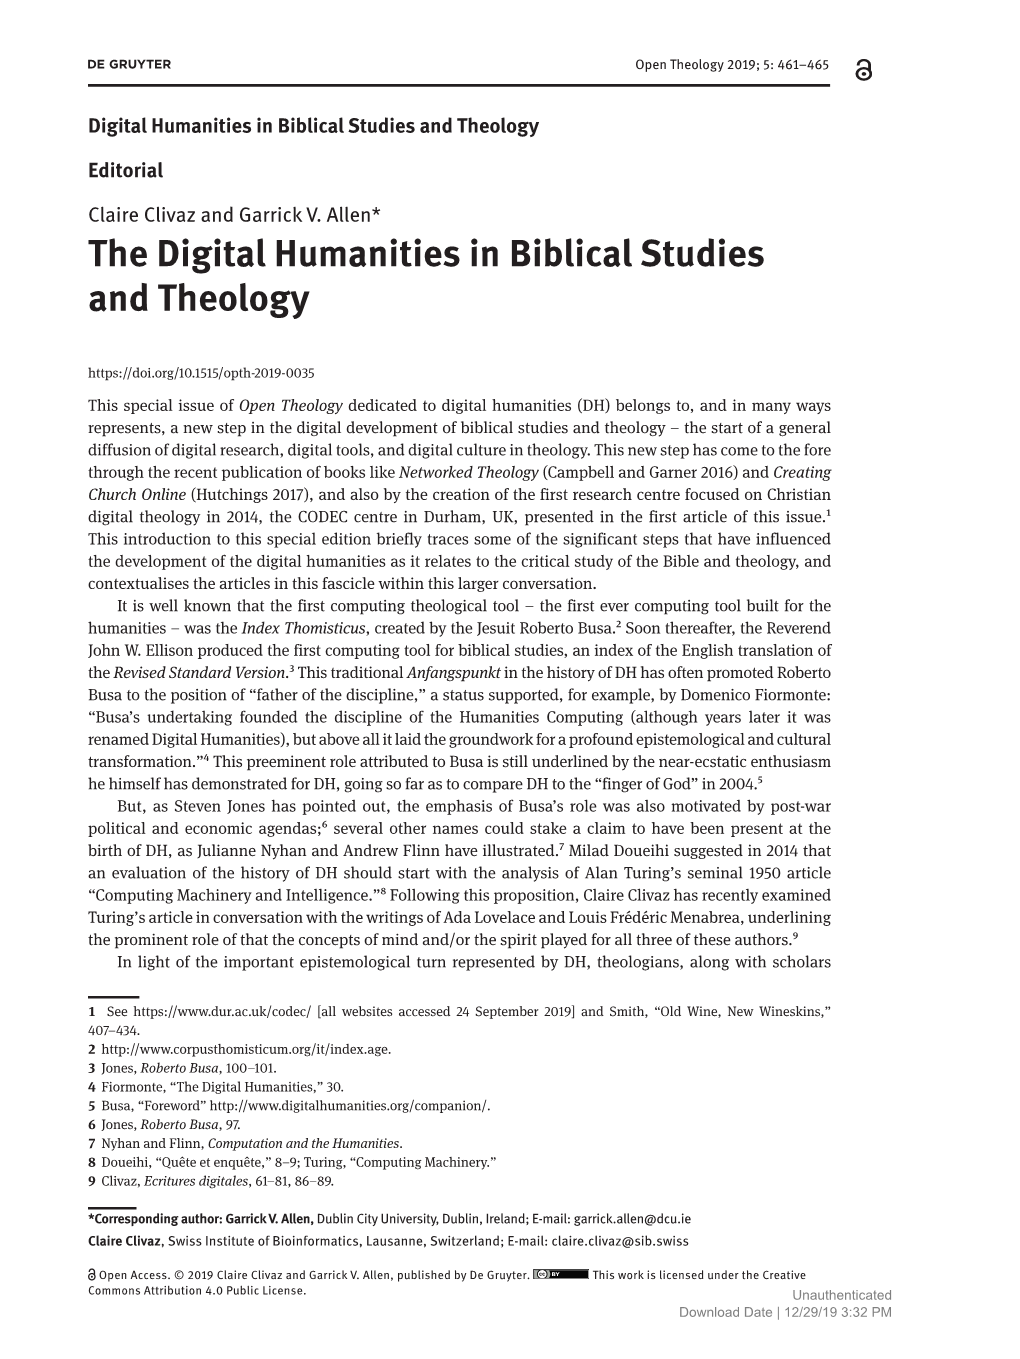 The Digital Humanities in Biblical Studies and Theology